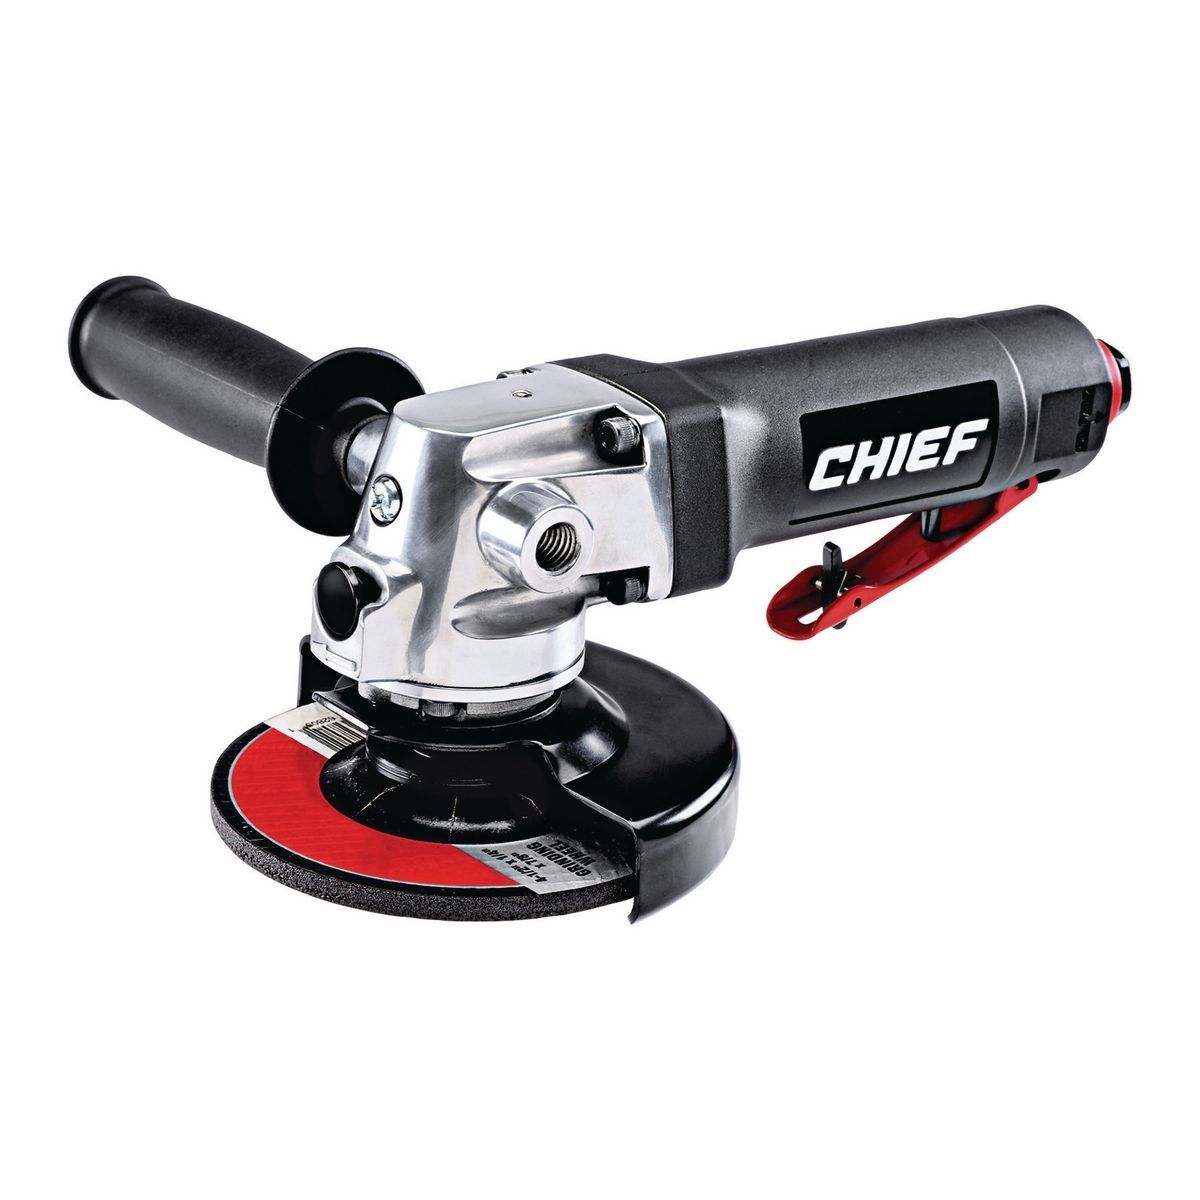 CHIEF Pneumatic 4-1/2 in. Professional Angle Grinder